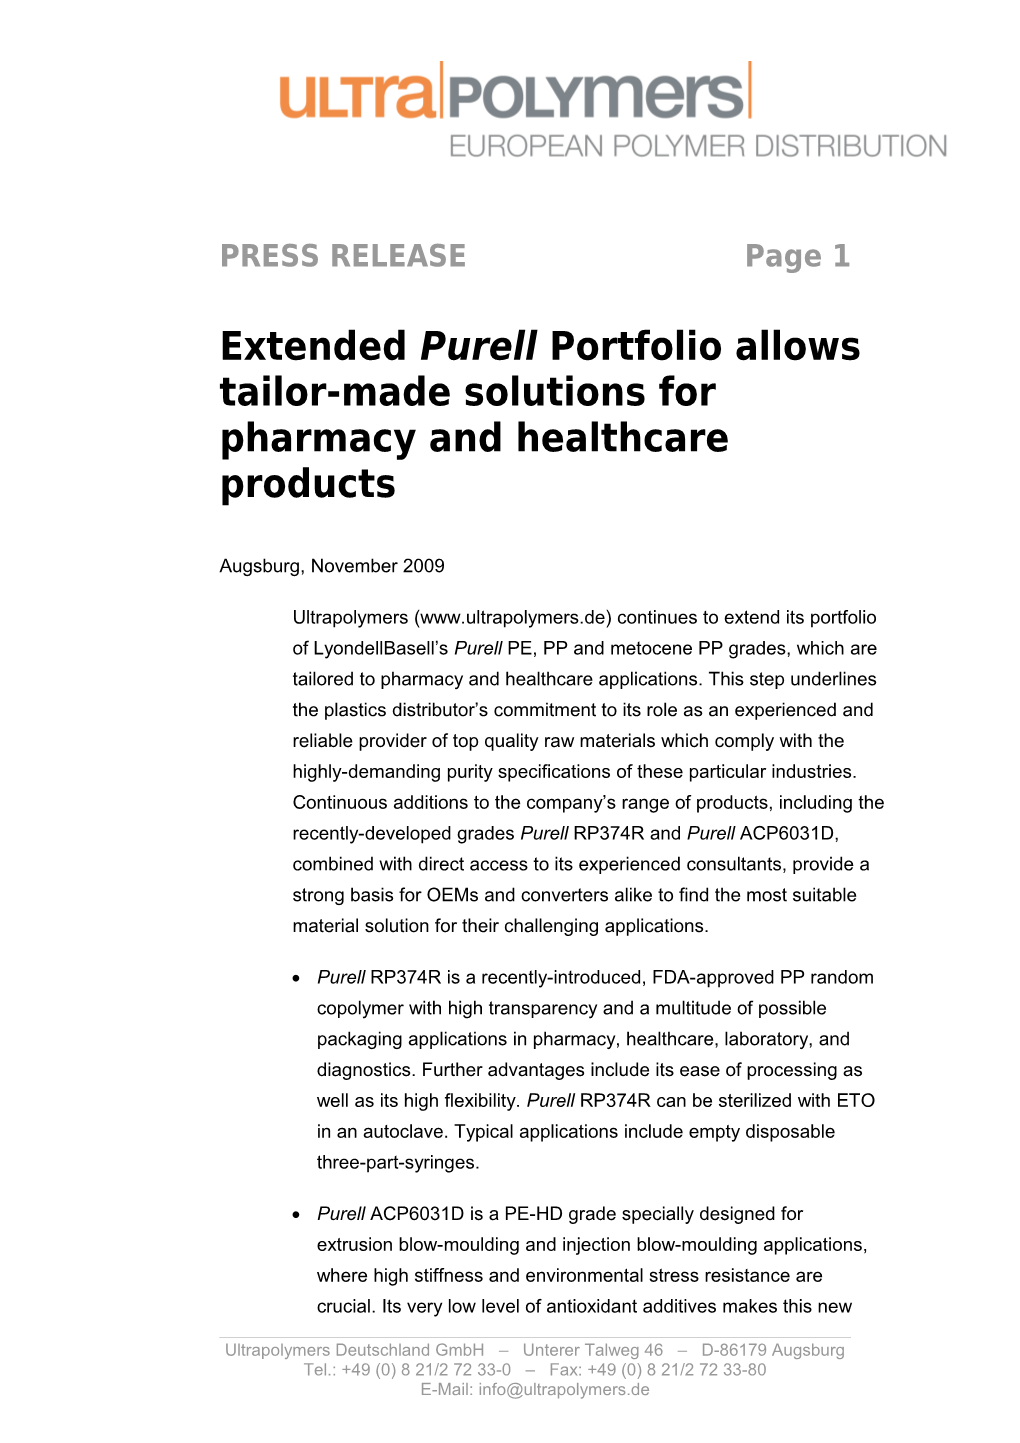 Extendedpurell Portfolio Allows Tailor-Made Solutions for Pharmacy and Healthcare Products